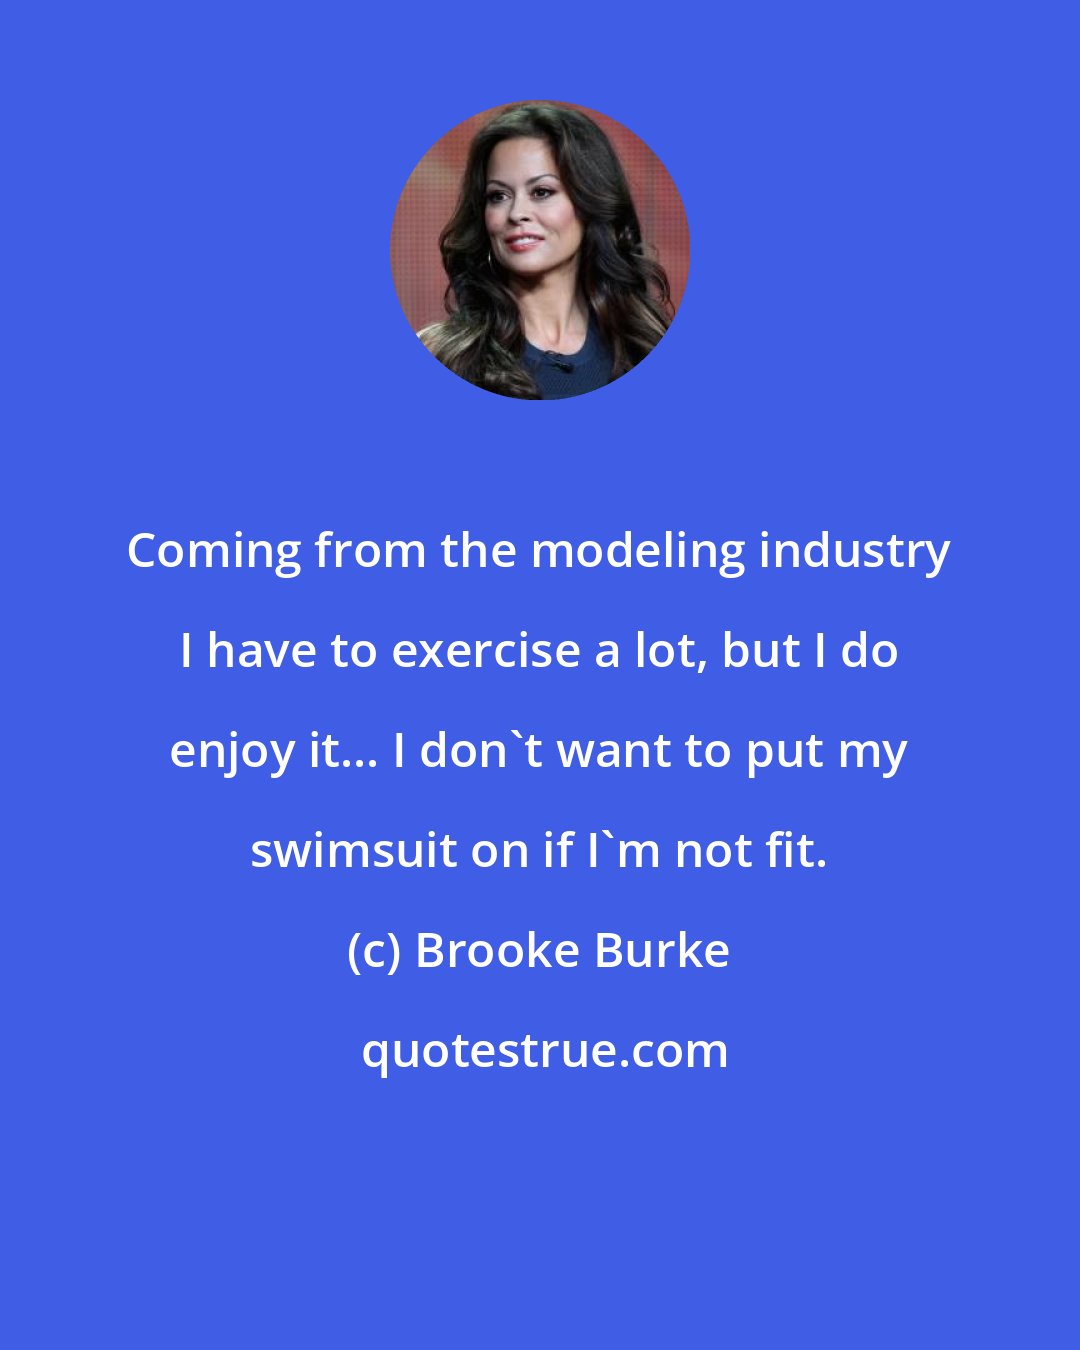 Brooke Burke: Coming from the modeling industry I have to exercise a lot, but I do enjoy it... I don't want to put my swimsuit on if I'm not fit.